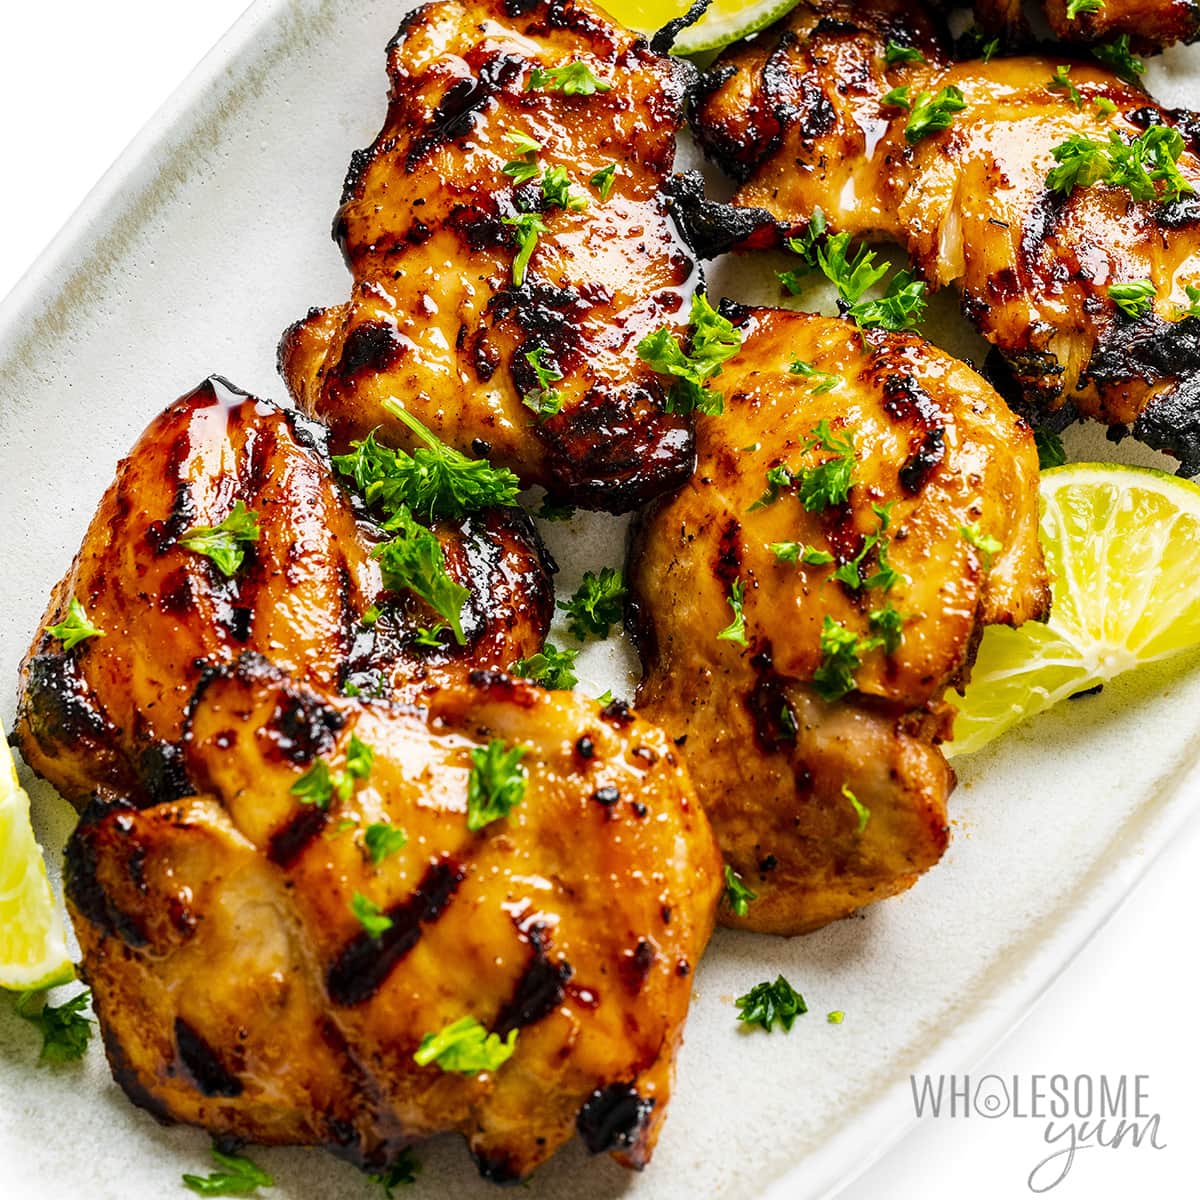 Boneless grilled chicken thighs plated.